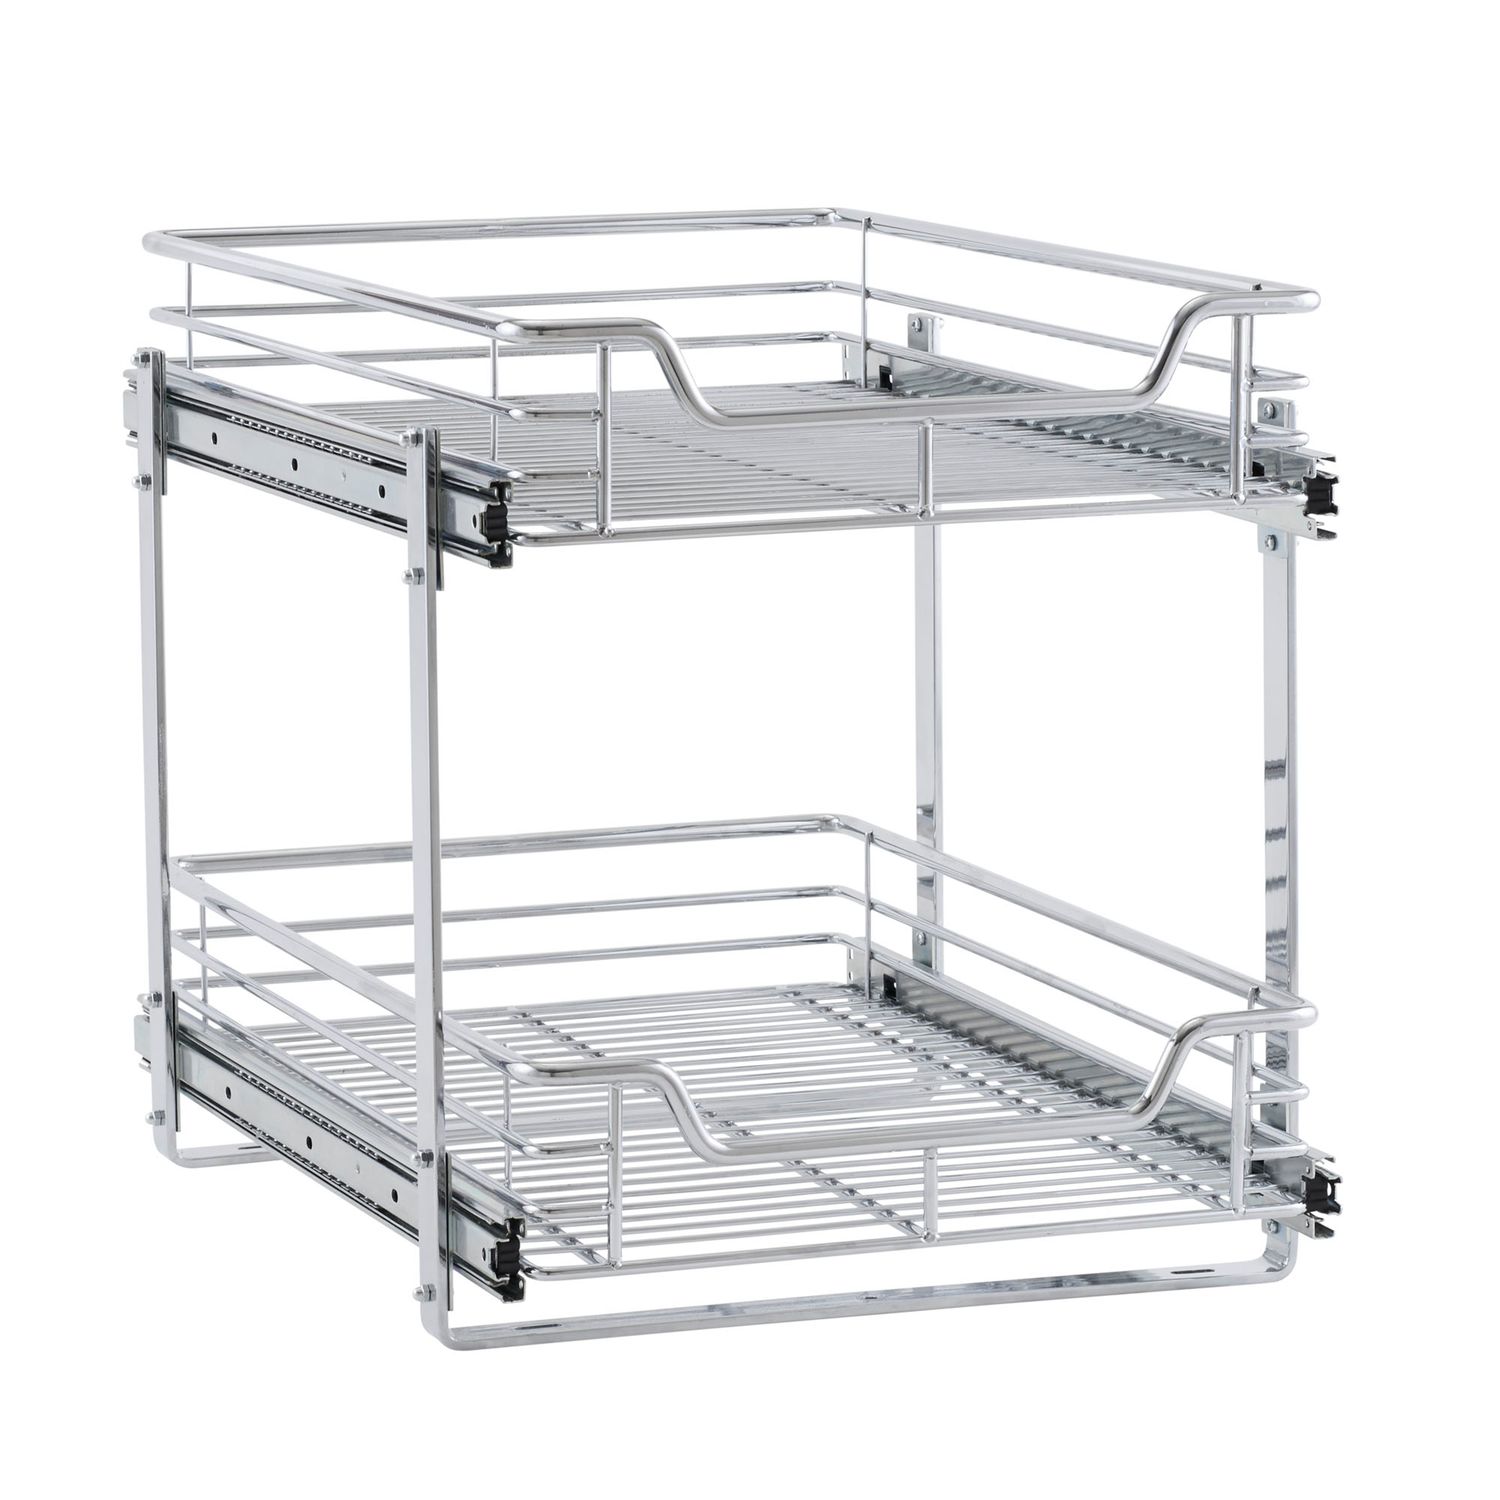 Image for Household Essentials Glidez 2-Tier 14.5-inch Wide Dual Sliding Under Cabinet Organizer at Kohl's.